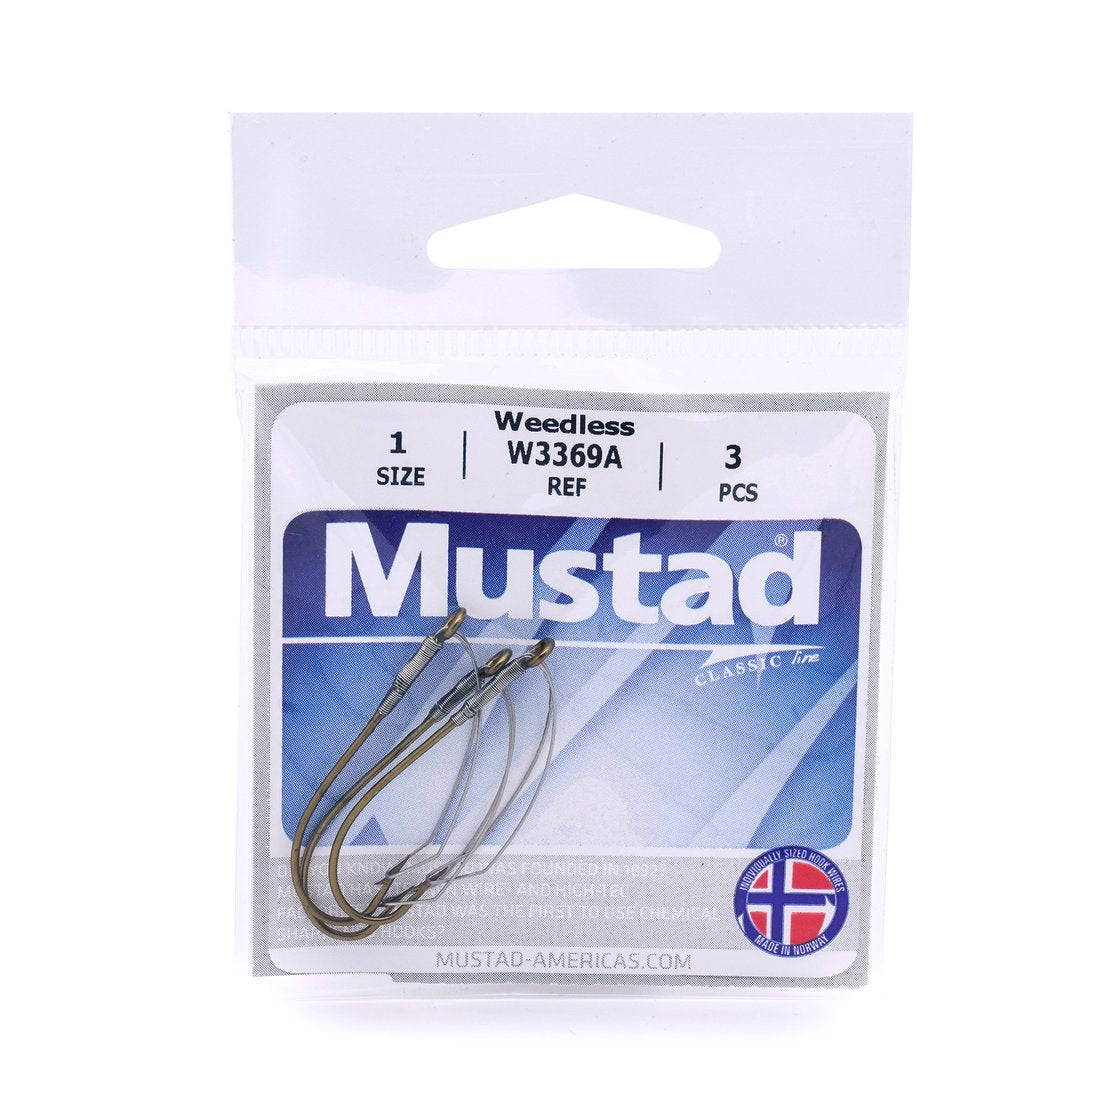 Mustad Weedless W3369A - Dogfish Tackle & Marine